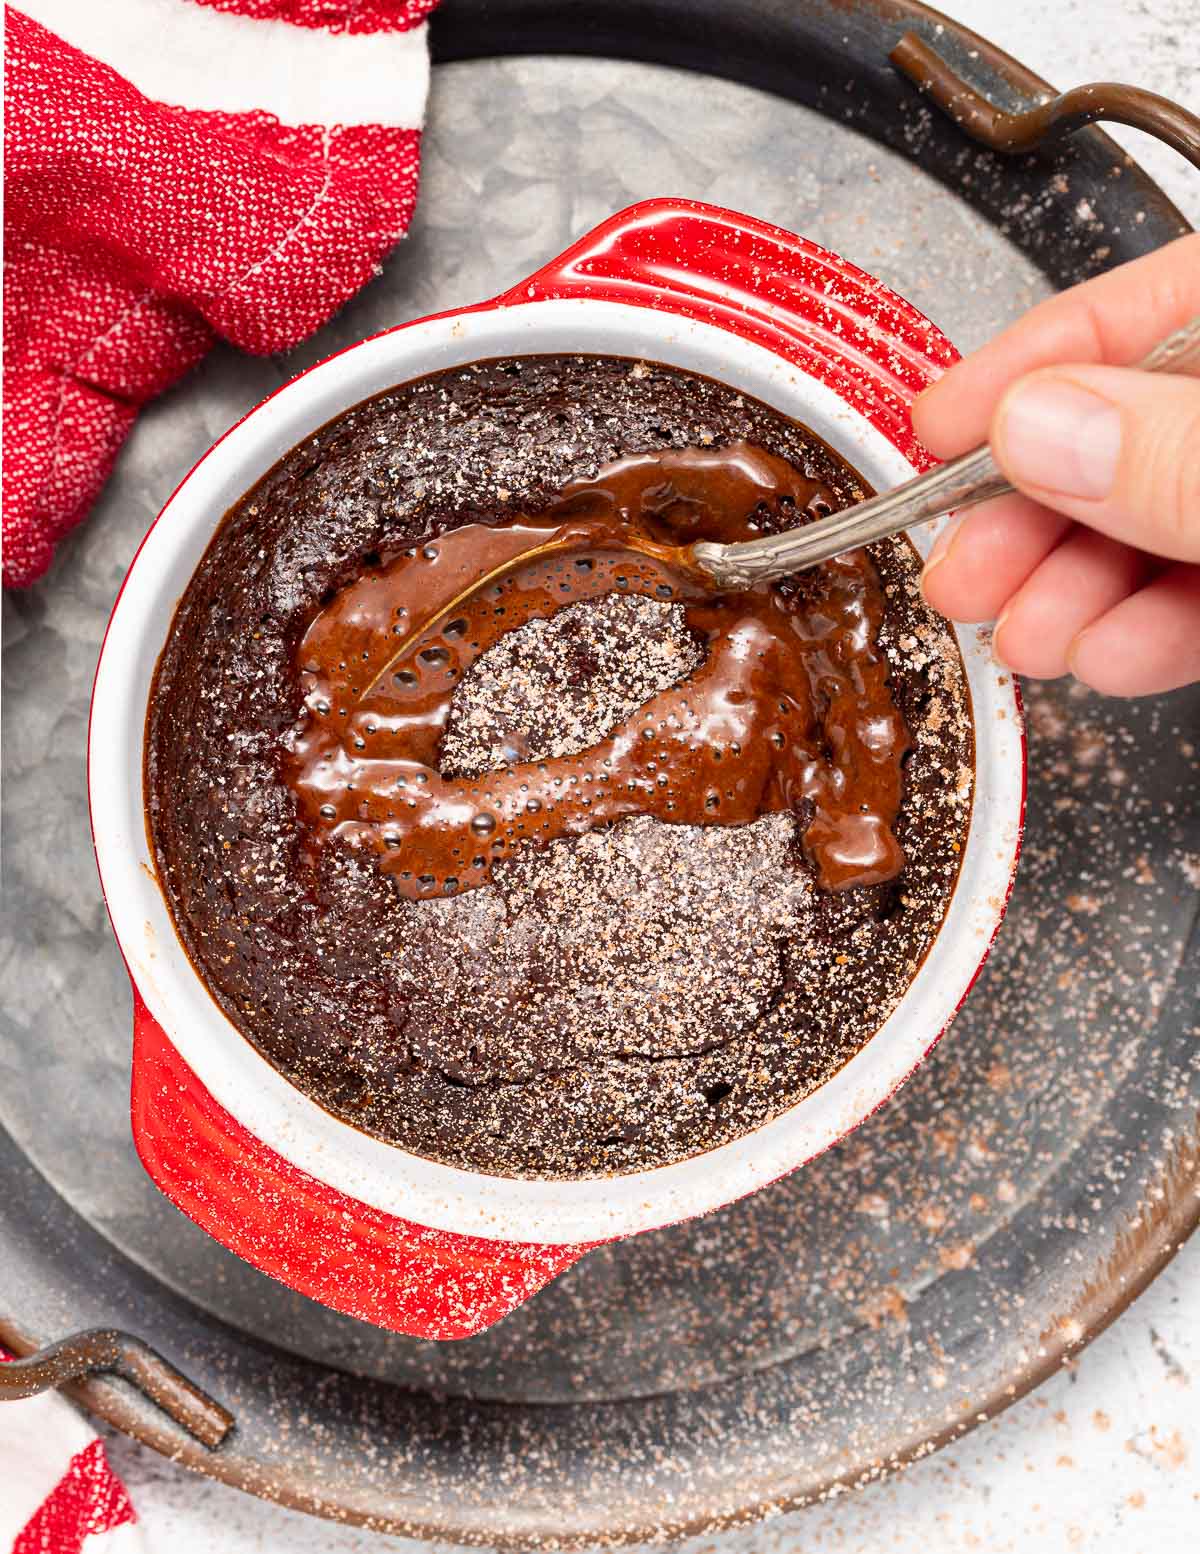 breaking into a chocolate lava cake 